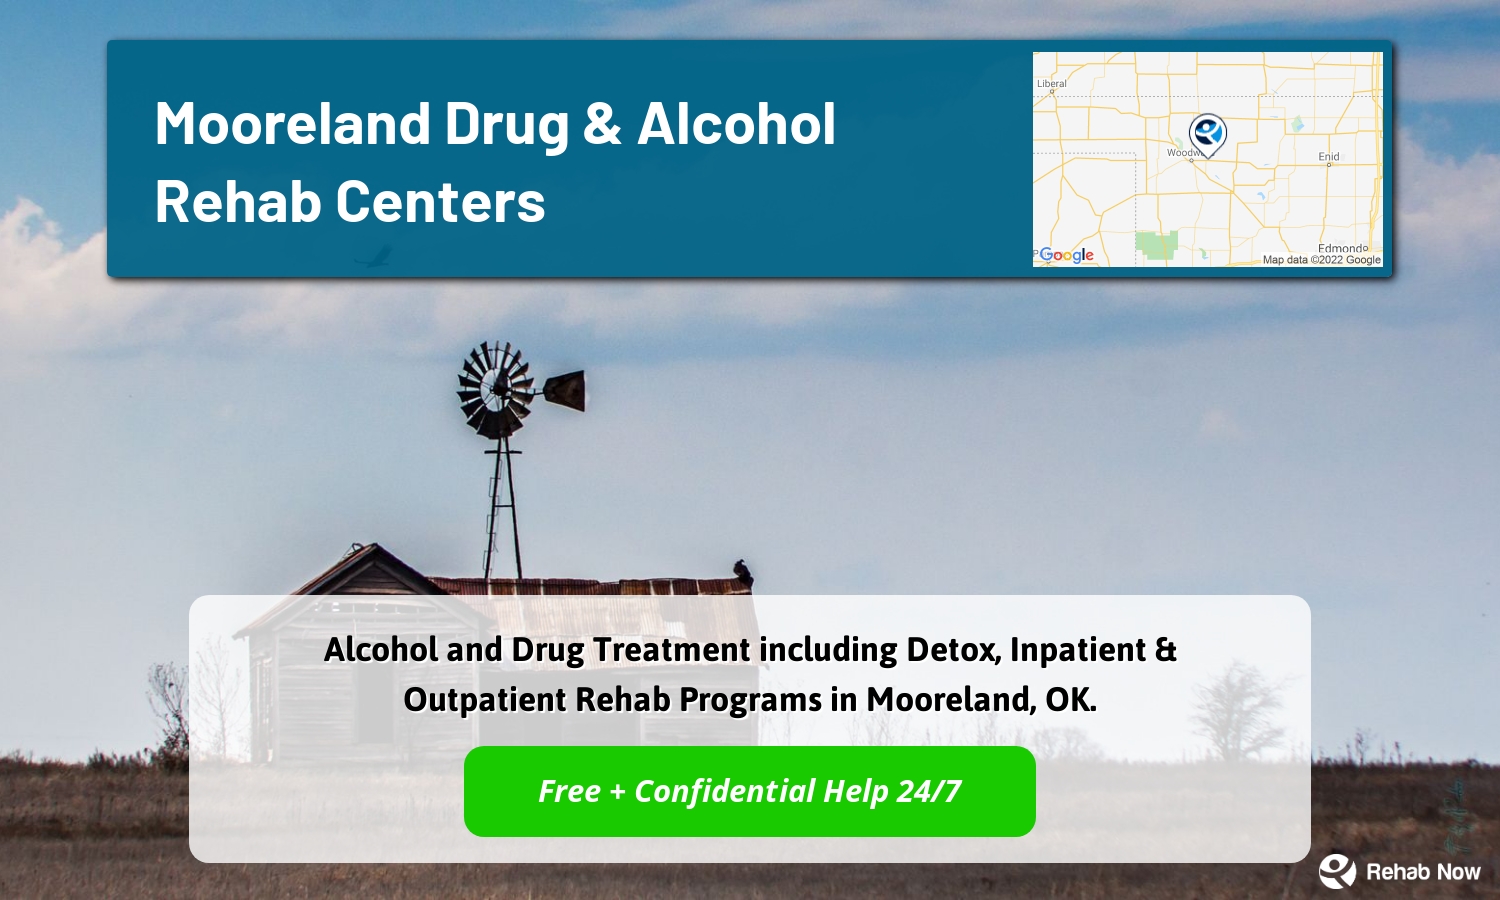 Alcohol and Drug Treatment including Detox, Inpatient & Outpatient Rehab Programs in Mooreland, OK.